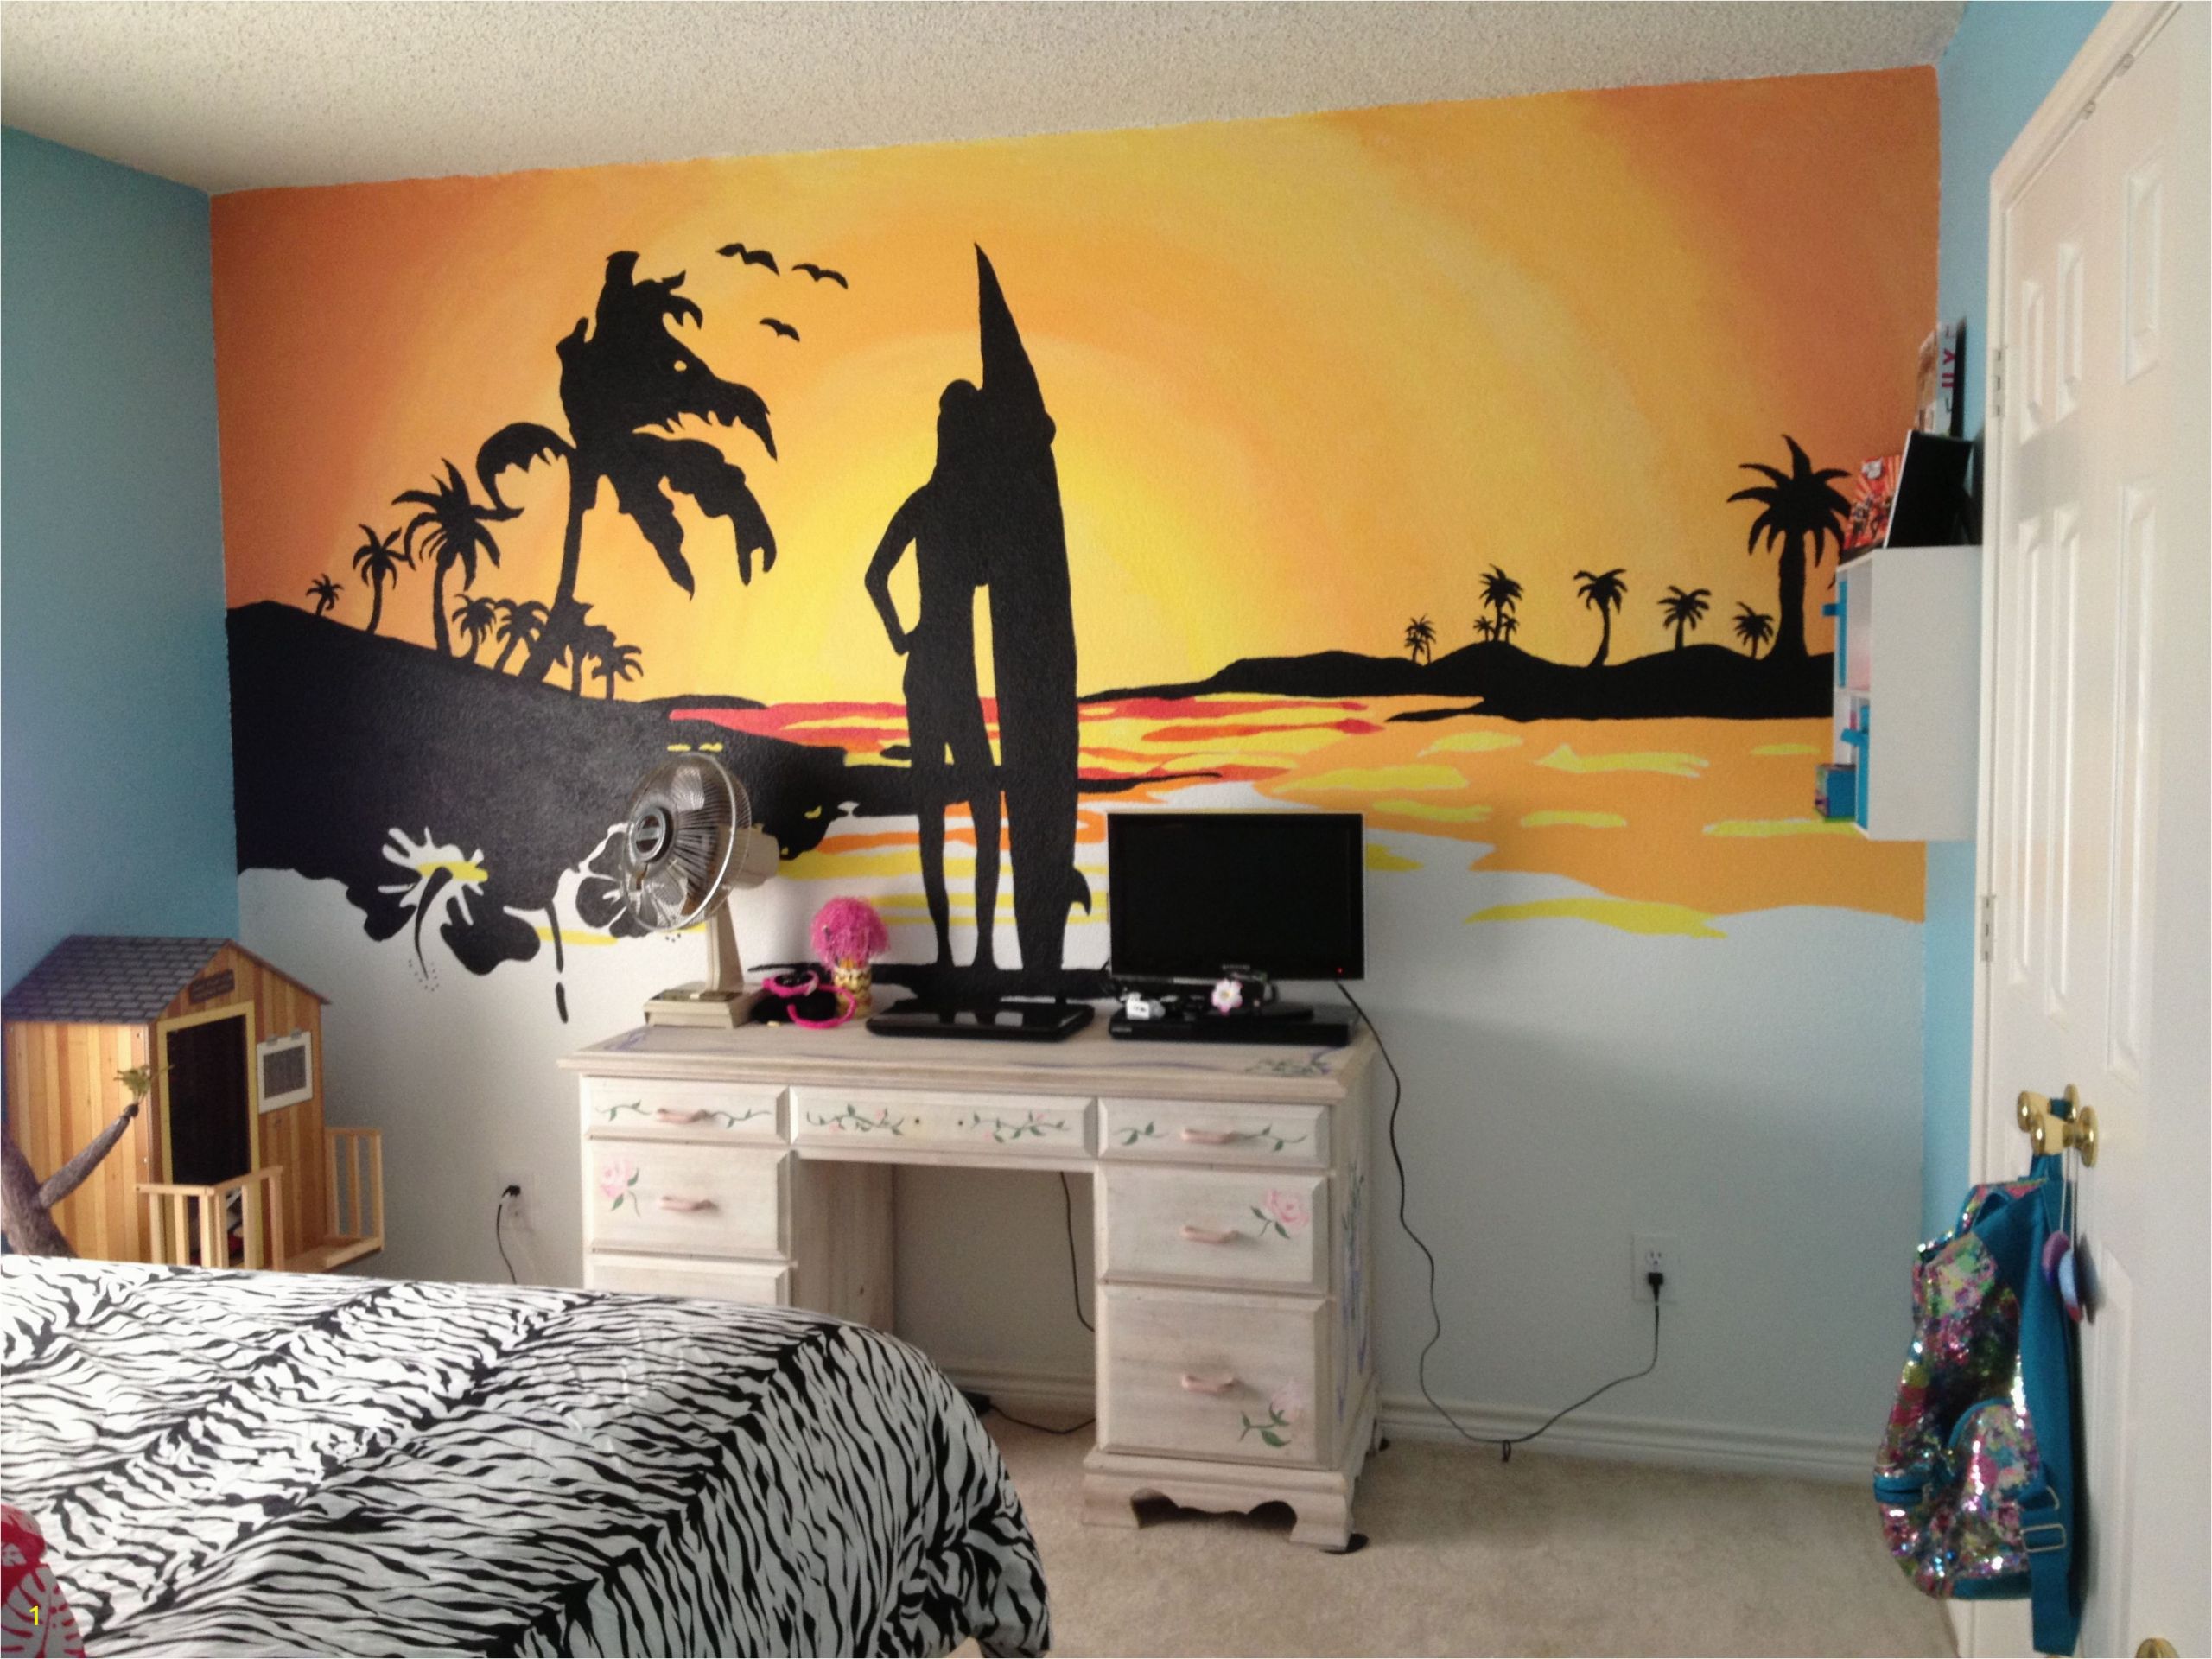 Beach Sunset Wall Mural Beach Sunset Mural My Husband and I Painted for My 10 Year